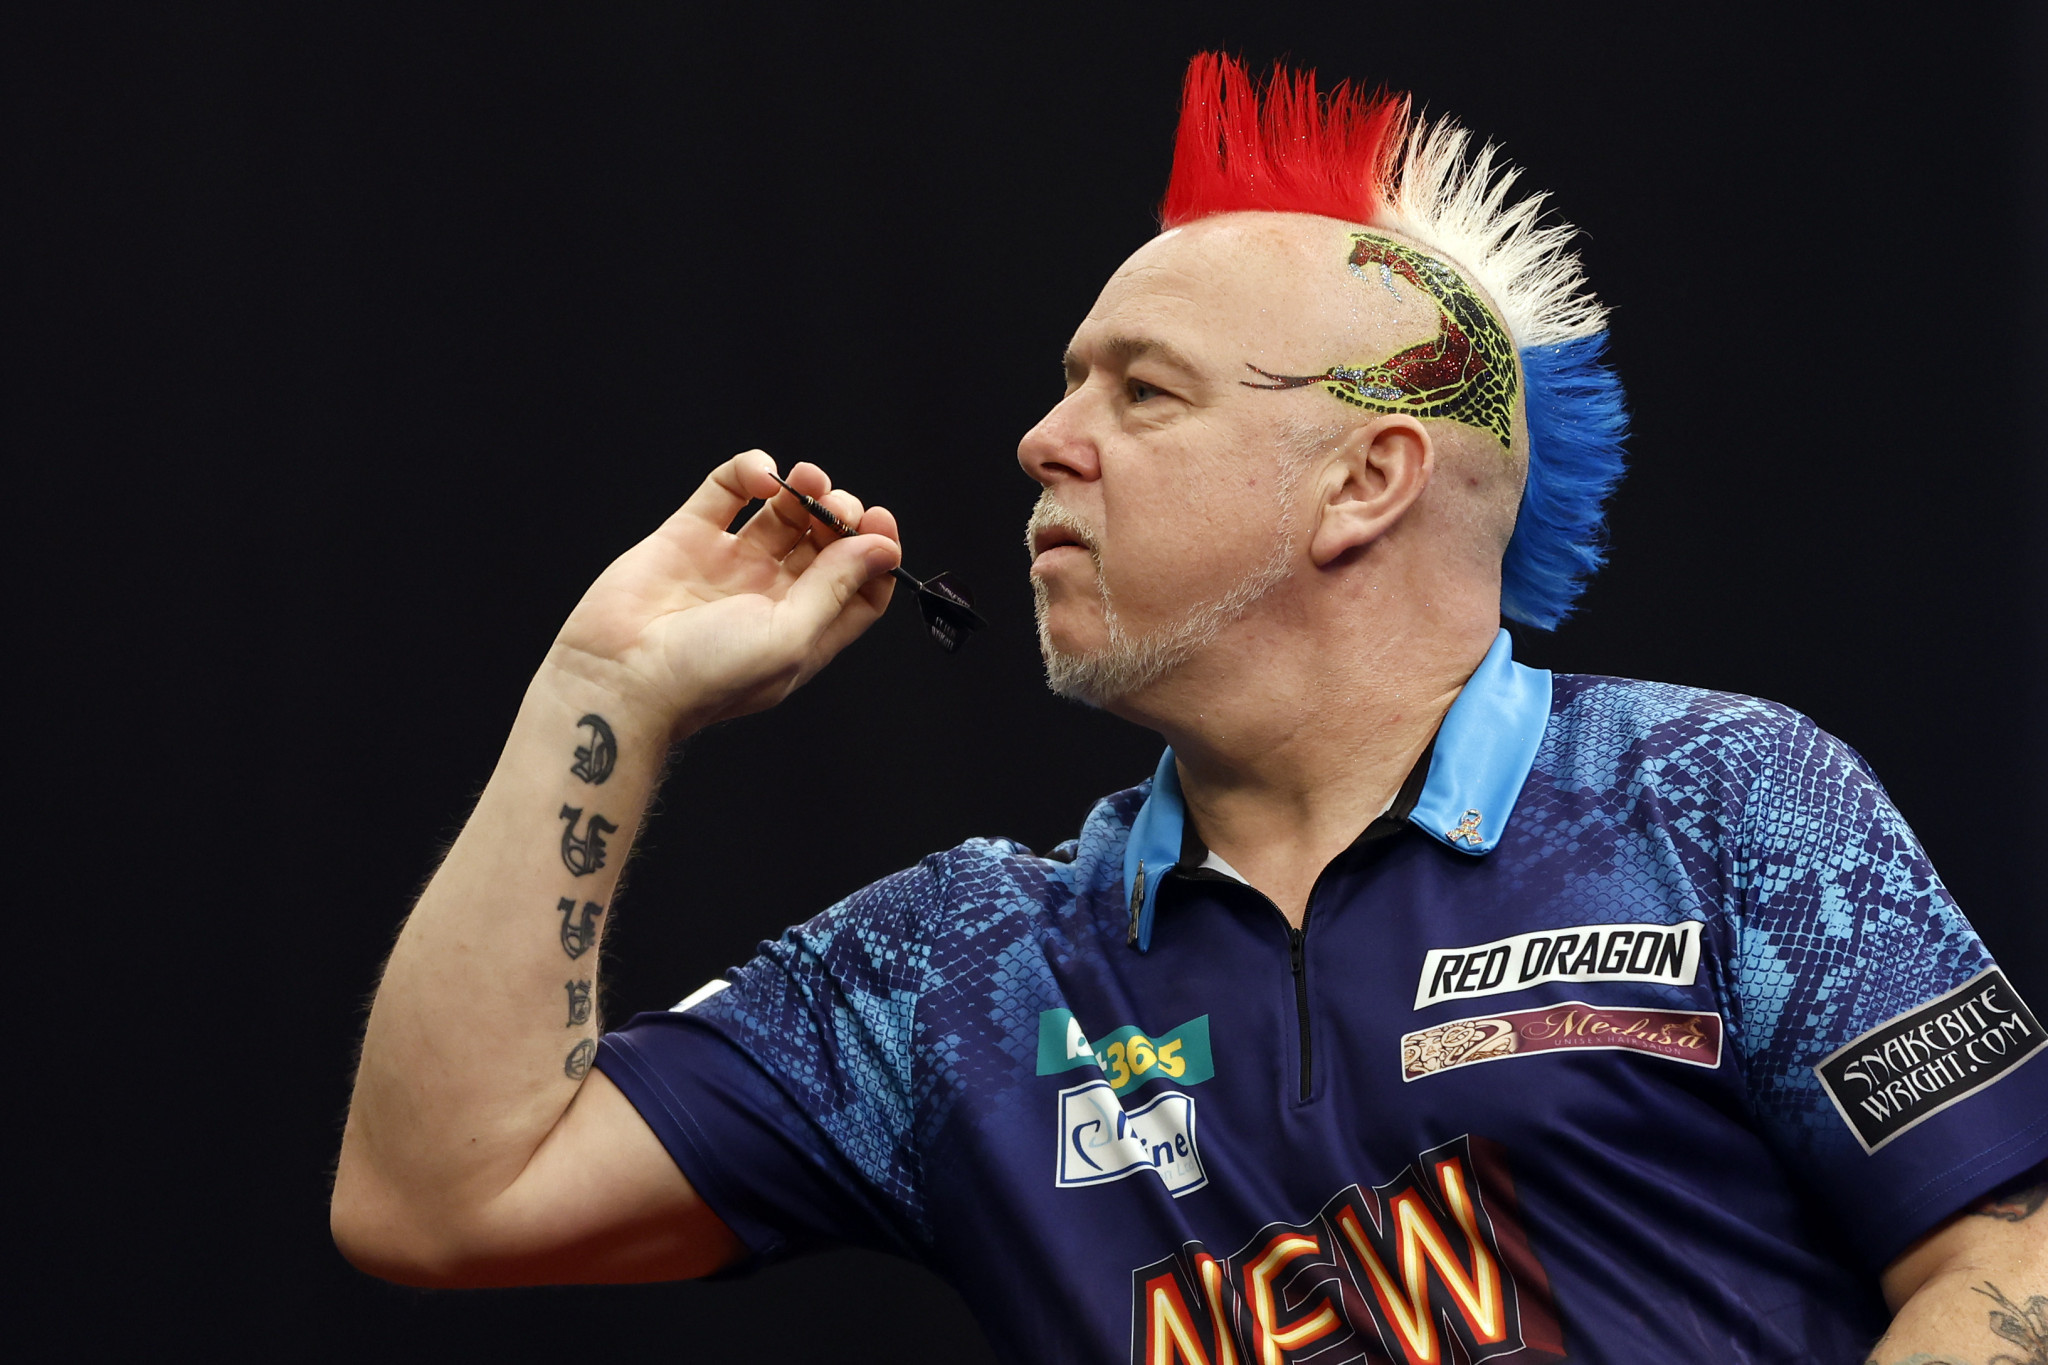 Scotland's Peter Wright beat England's James Wade to win the European Championship in Dortmund ©Getty Images